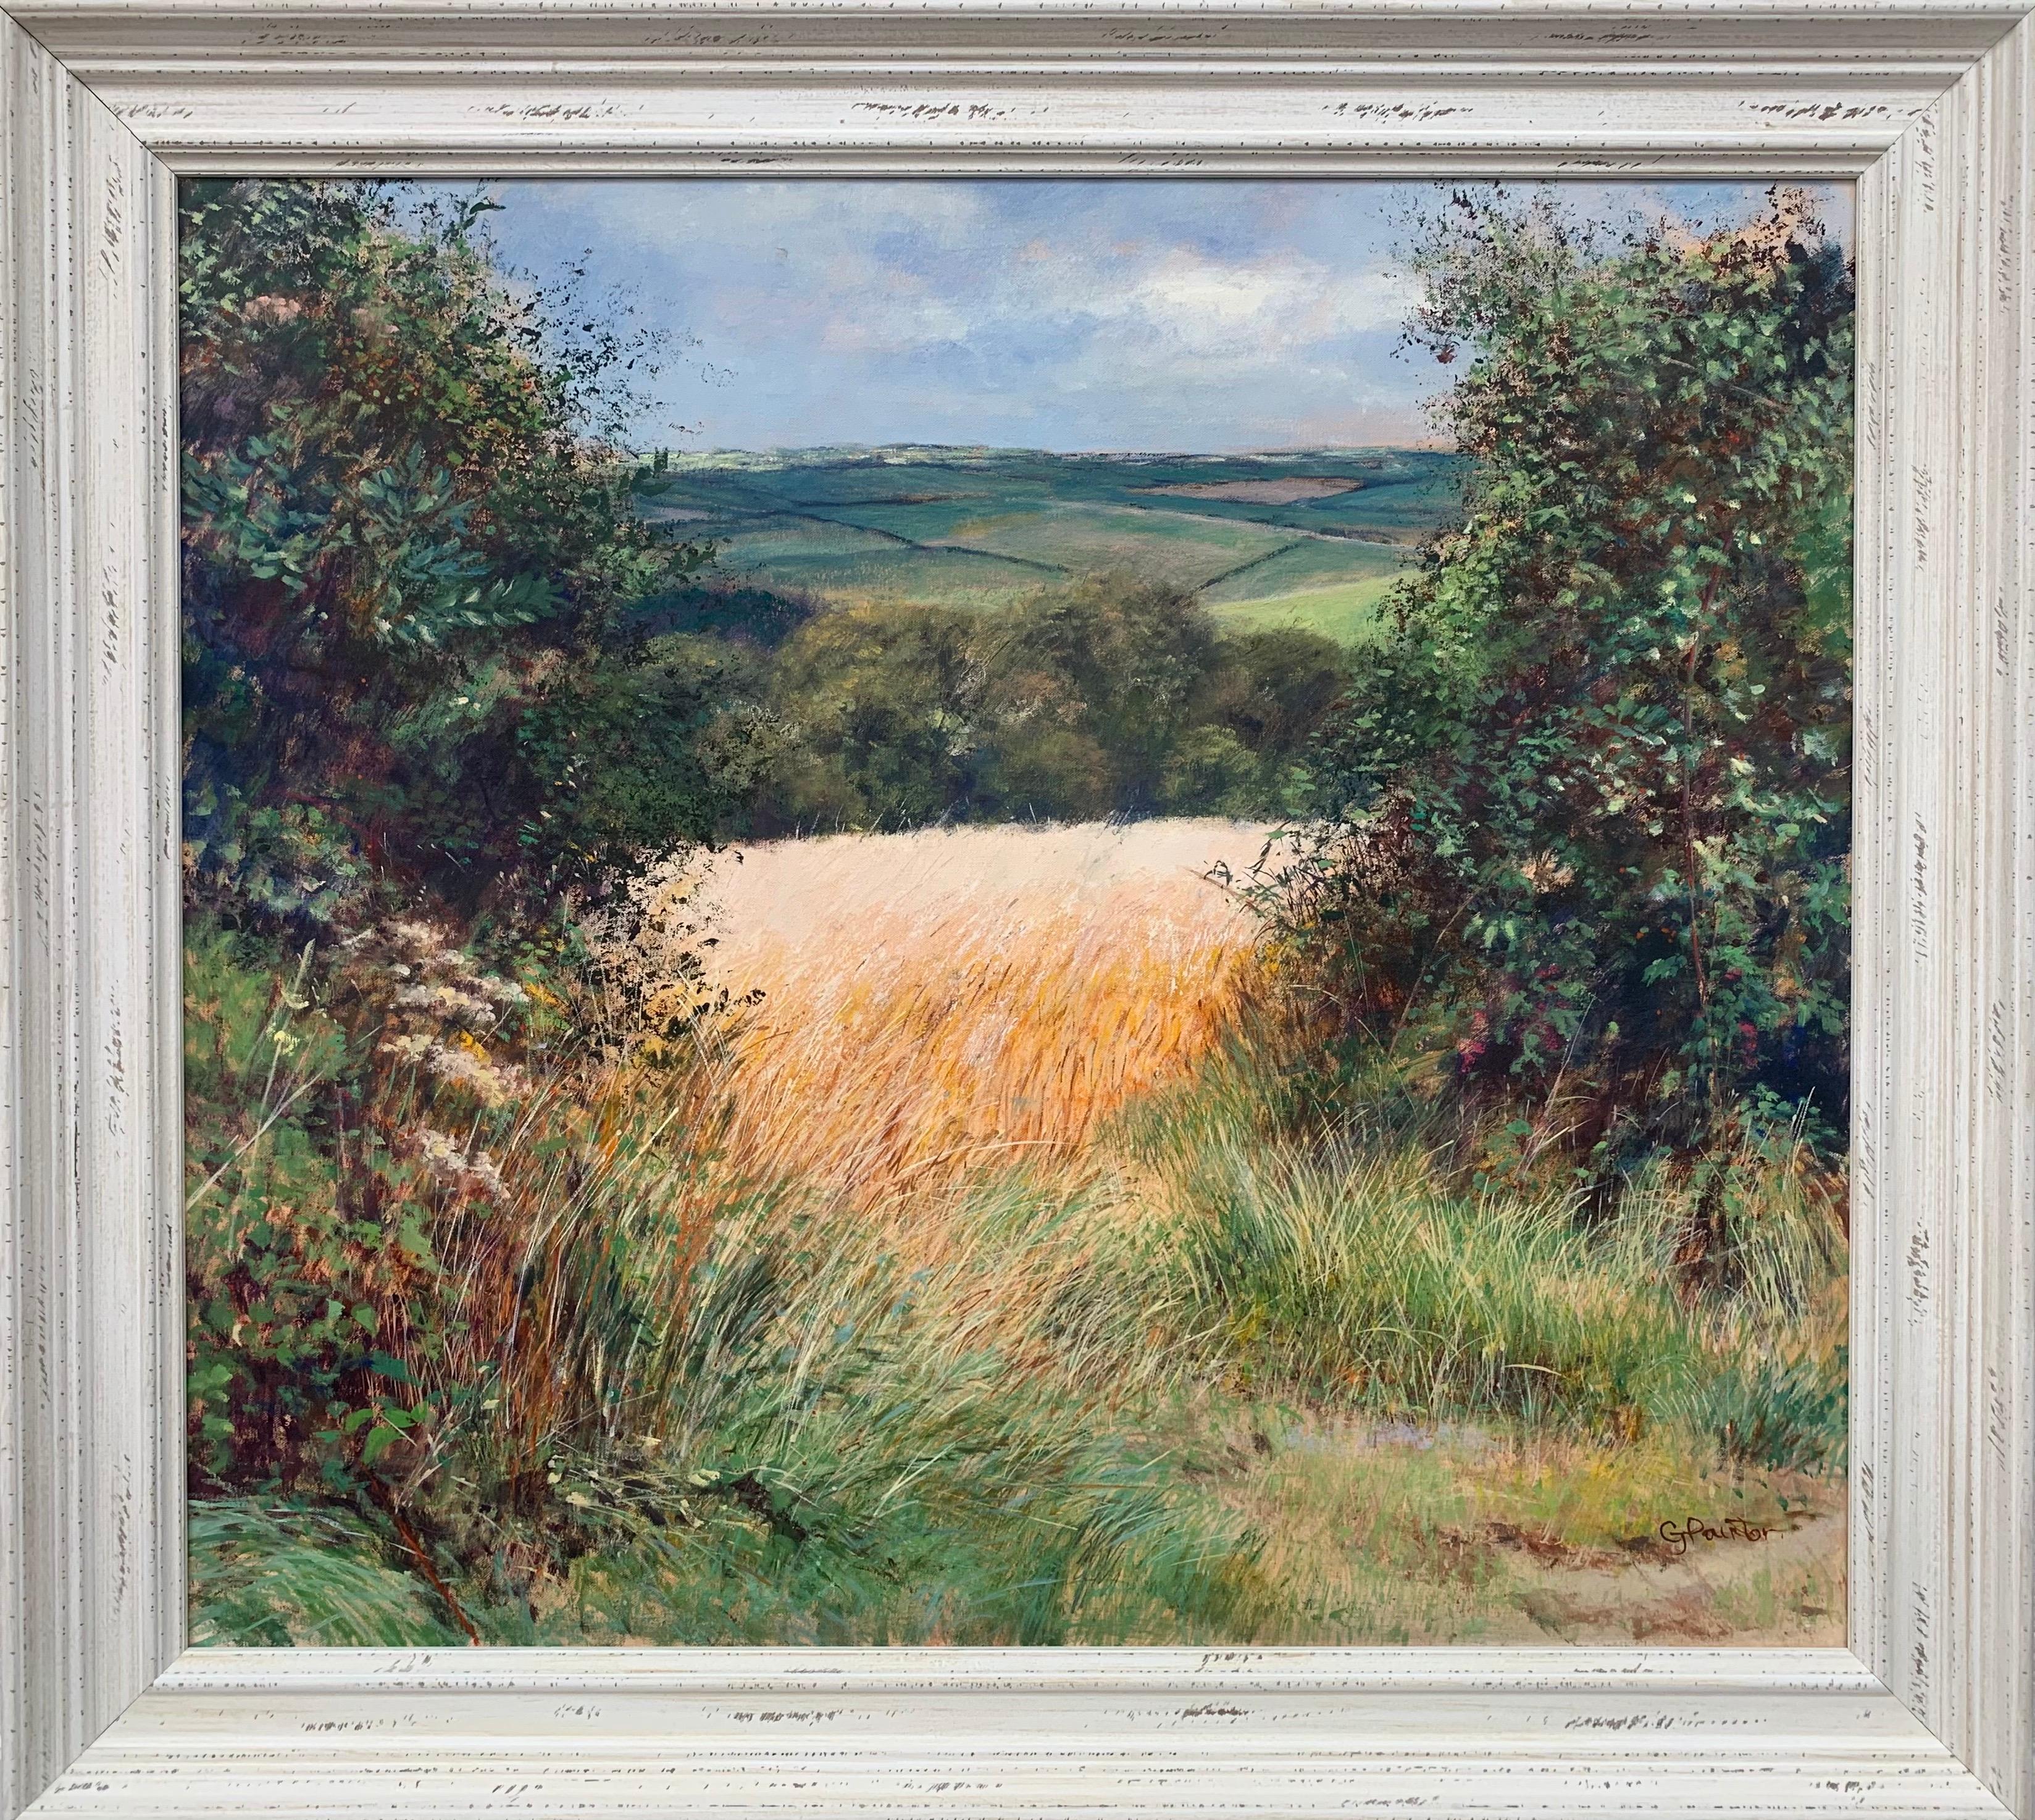 Graham Painter Animal Painting - English Summer Hedgerow & Field Landscape Oil Painting by Modern British Artist